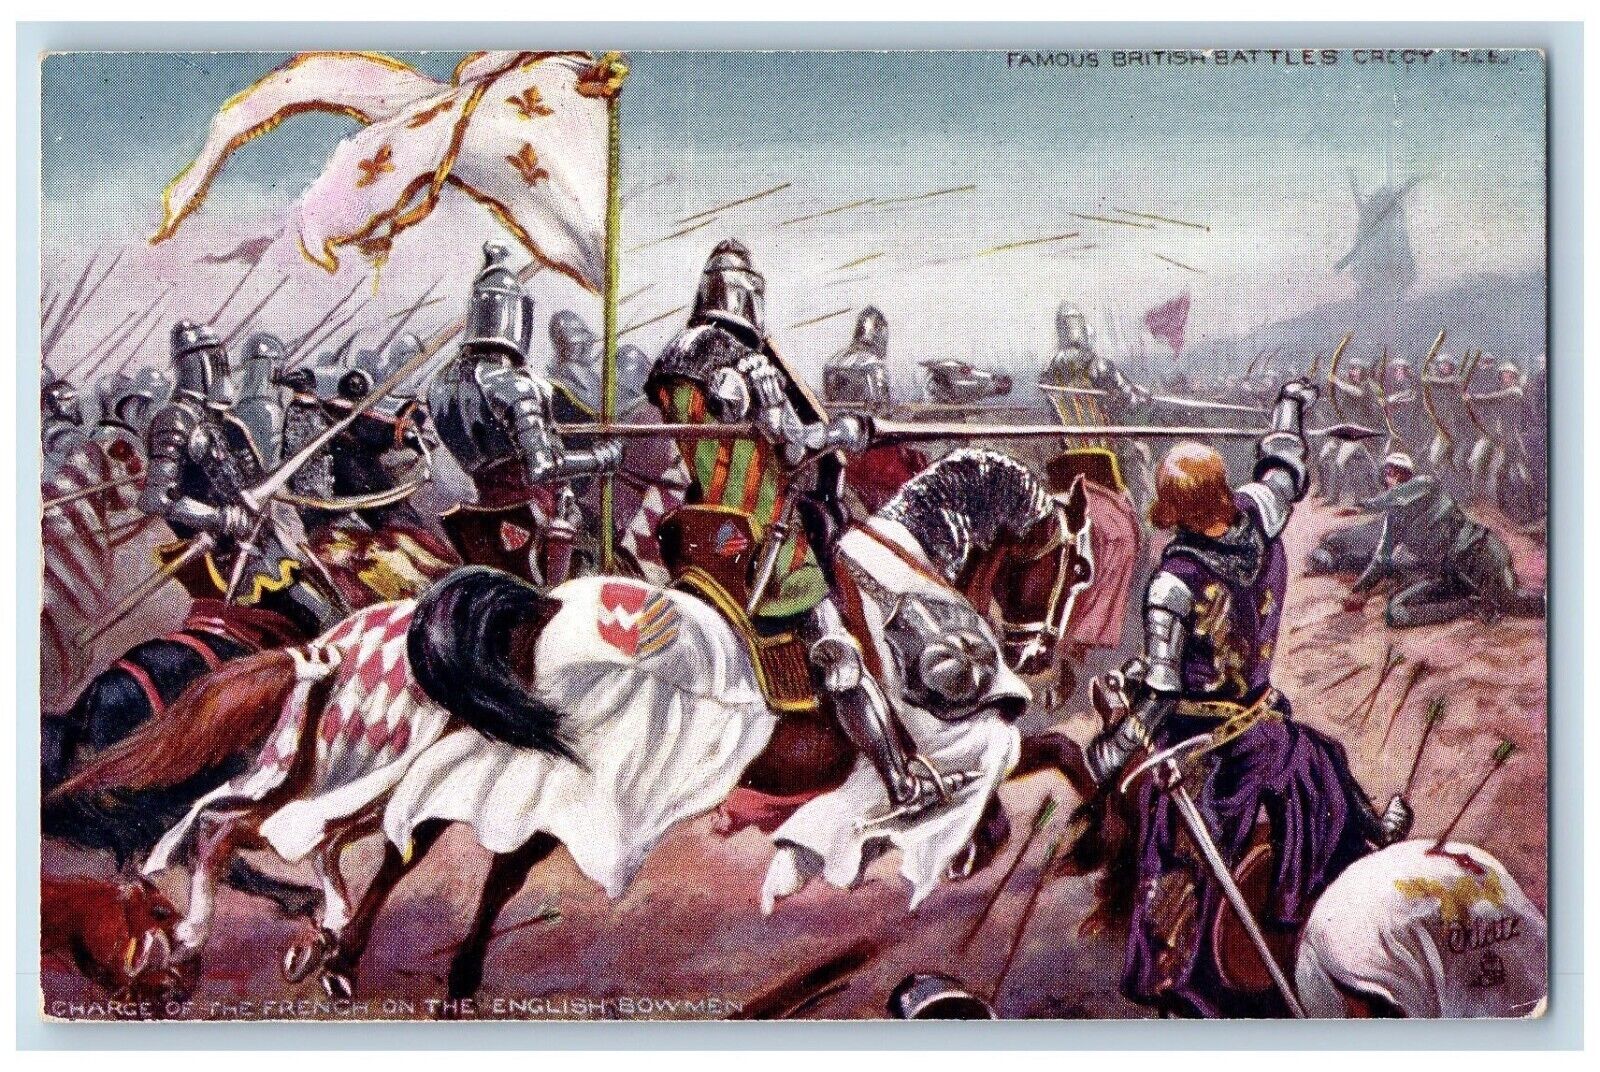 British Battles Crecy Postcard Charge Of The French On English Bowmen Oilette